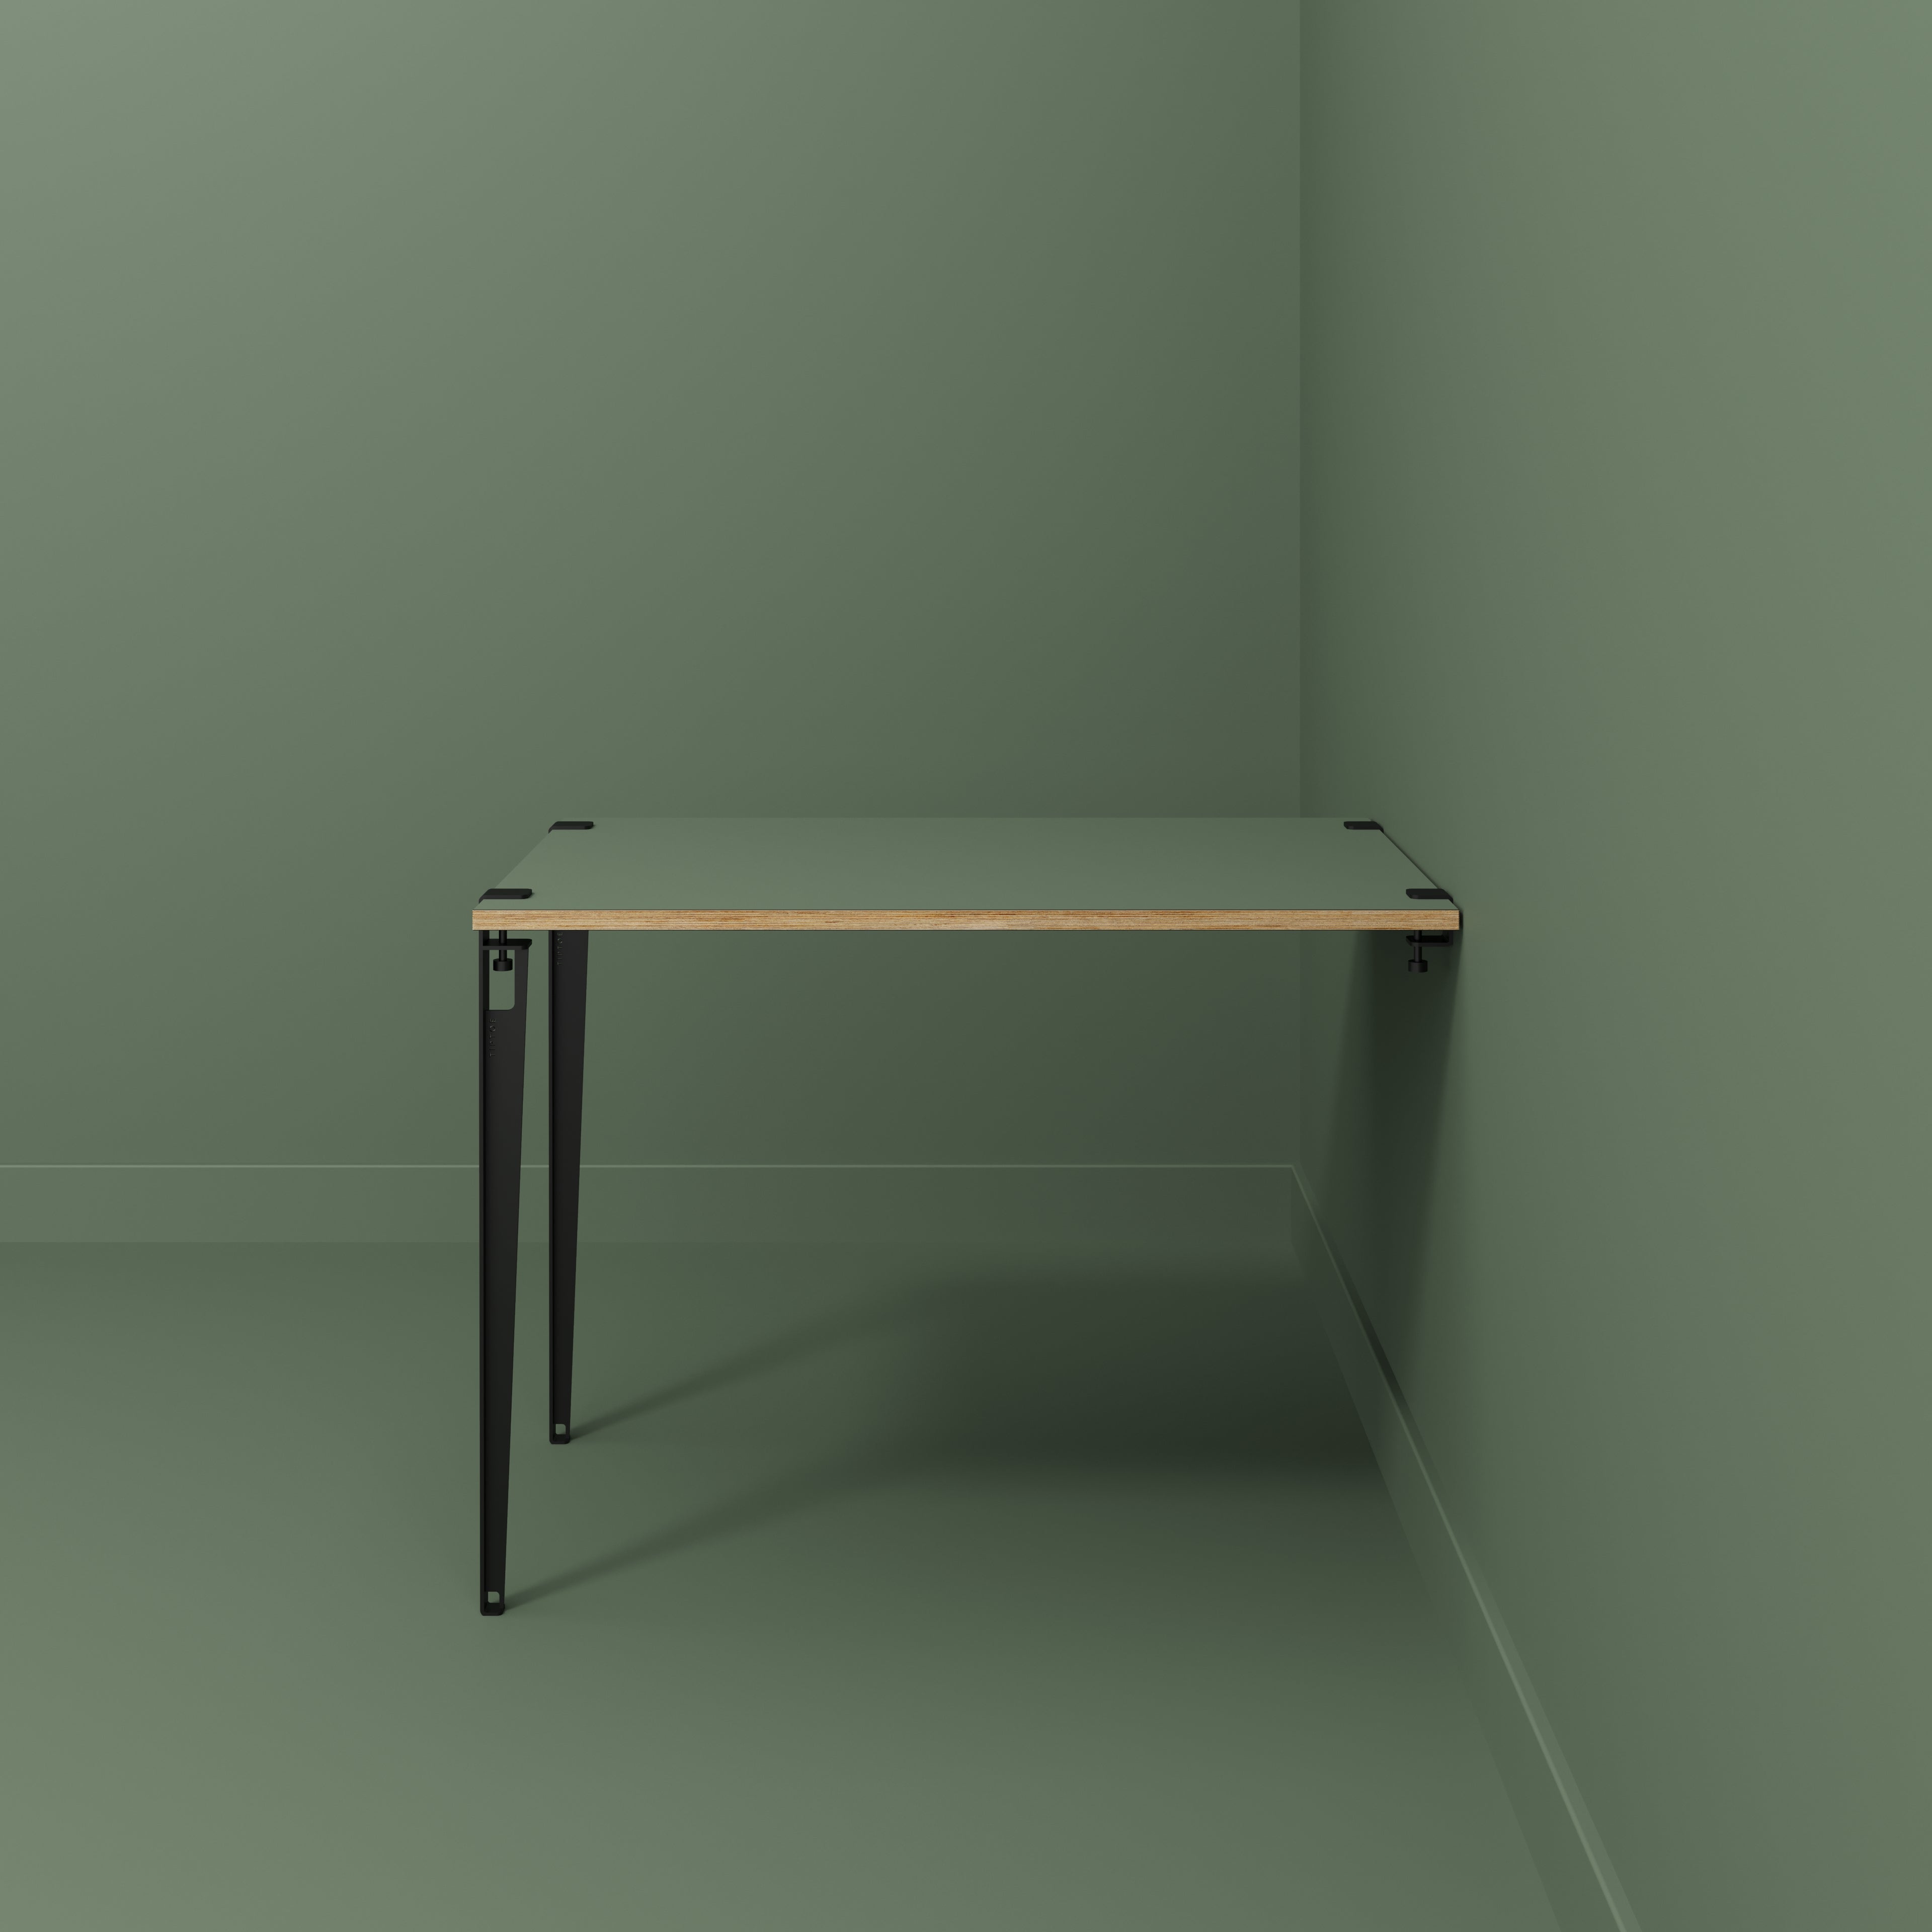 Wall Table with Black Tiptoe Legs and Brackets - Formica Green Slate - 1200(w) x 800(d) x 900(h)